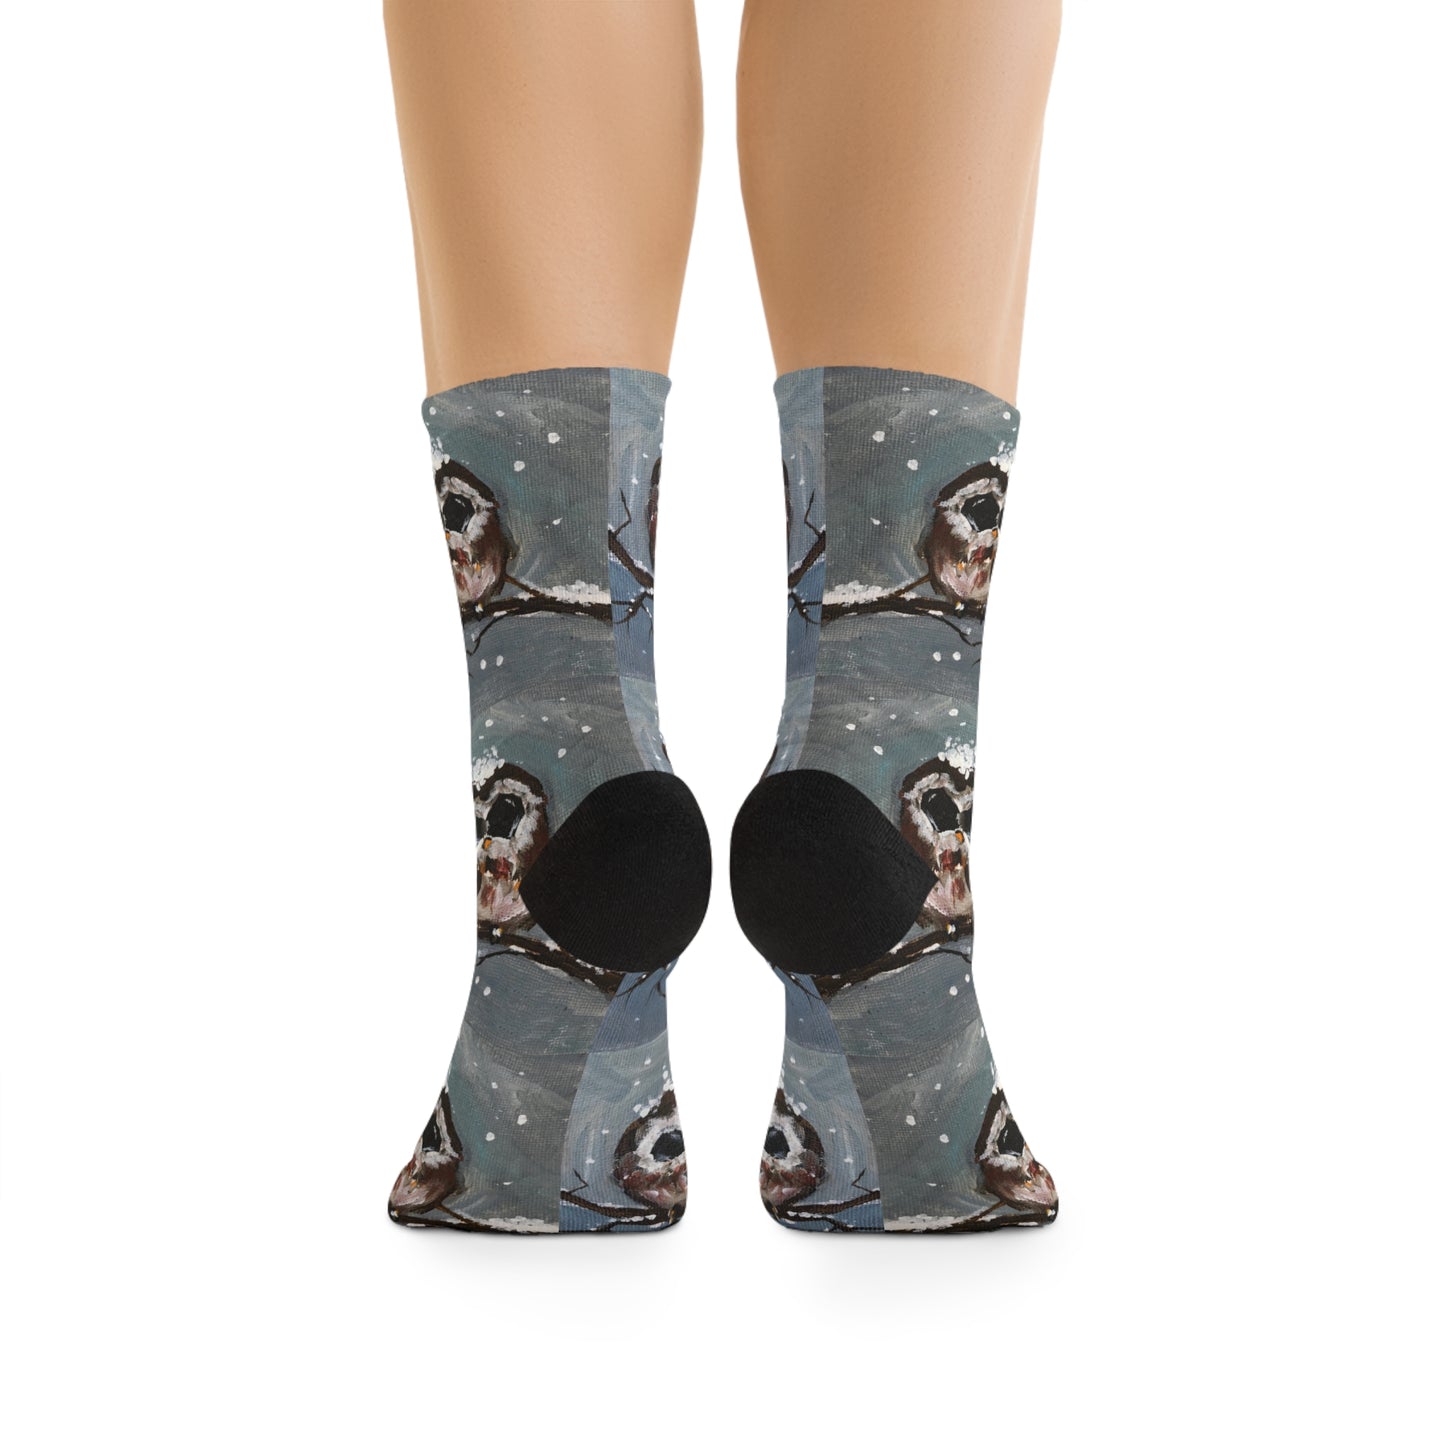 Who Us? Three Baby Owls in Snow Pattern Socks